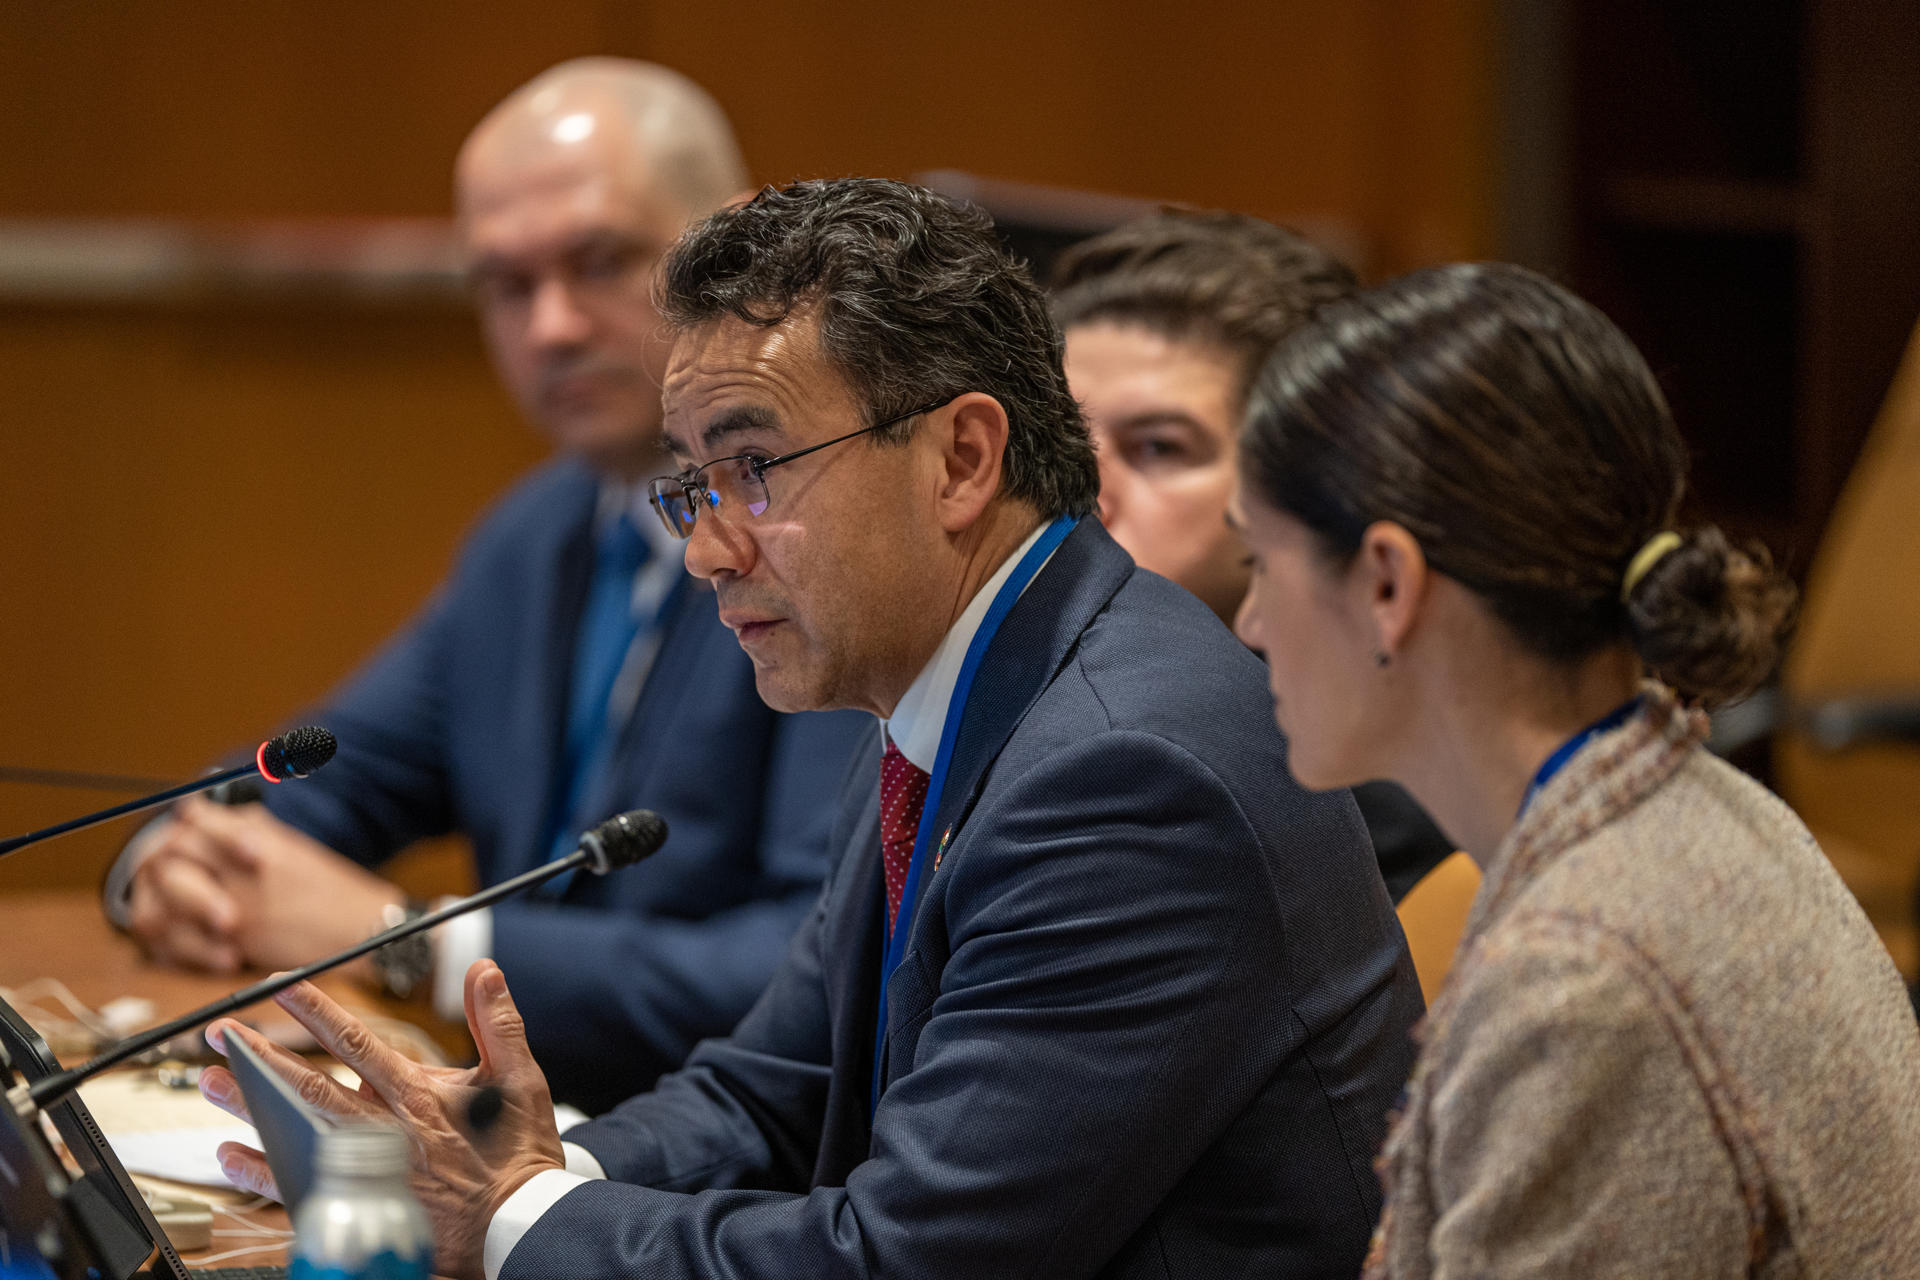 Rigoberto Ariel Yépez-García, Infrastructure and Energy Manager - Inter-American Development Bank participates in the Source of Innovation to accelerate SDG6 at the United Nations Water Congress in New York (USA).EFE/ Ángel Colmenares